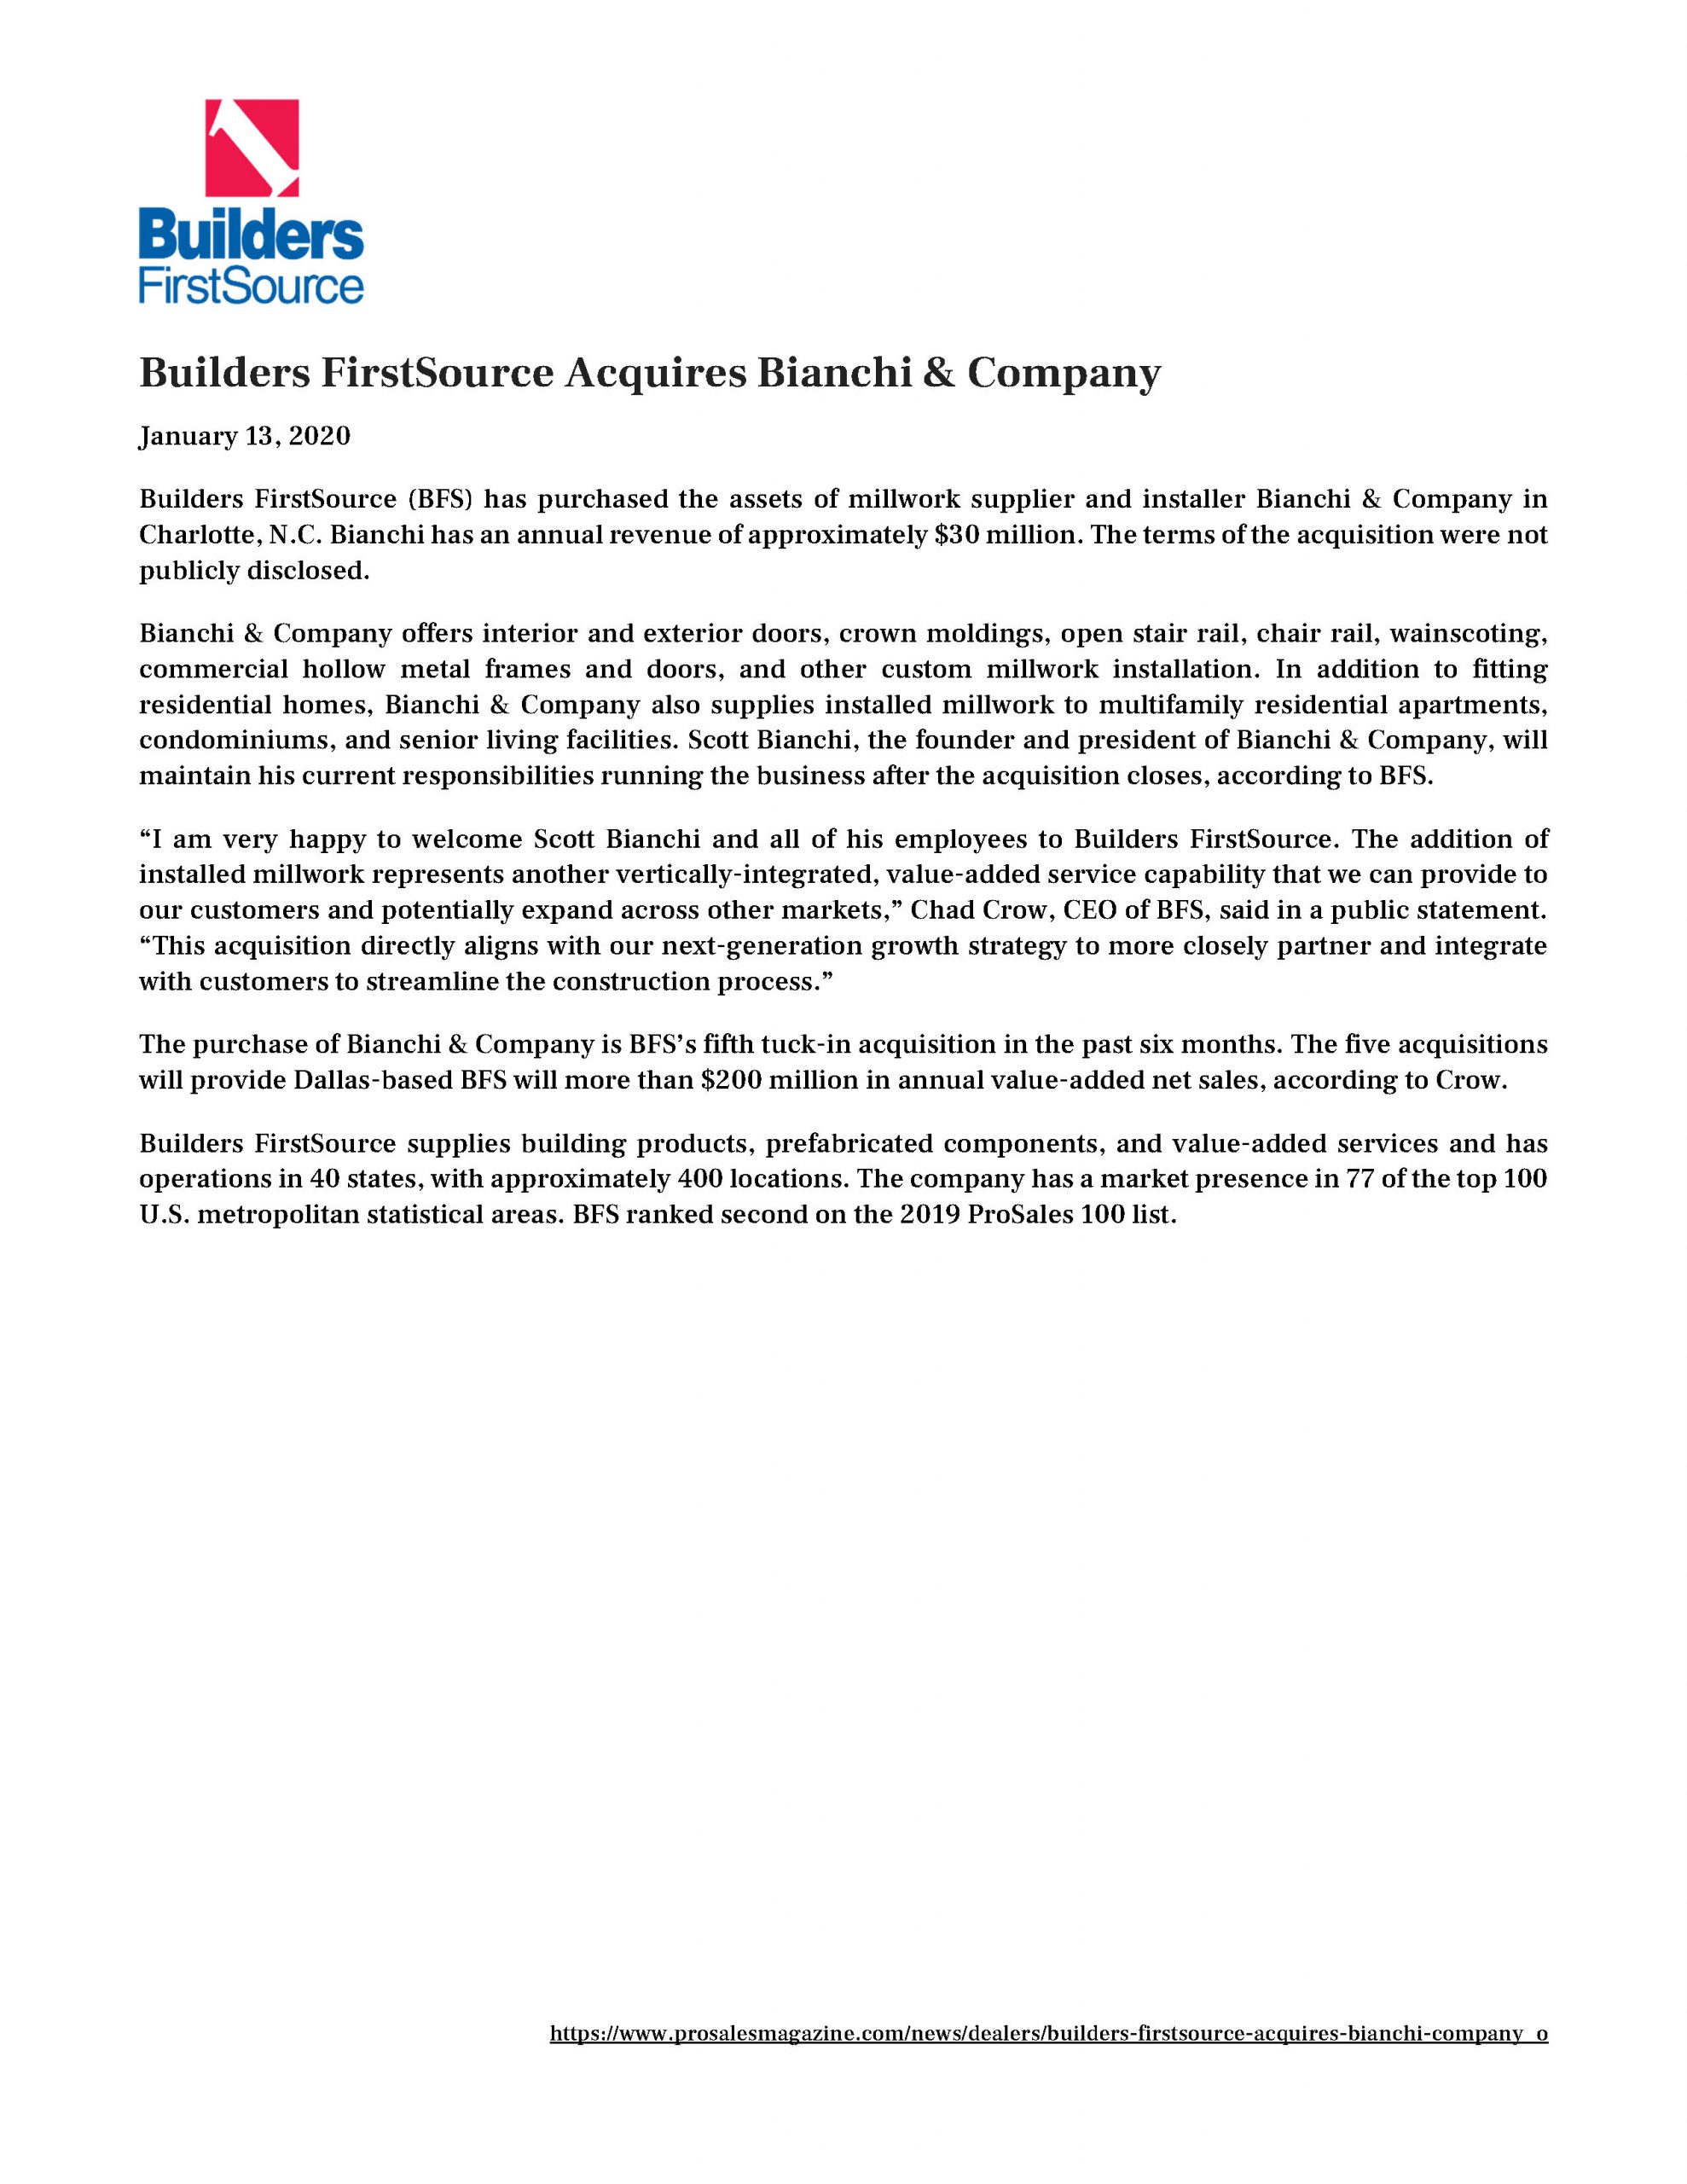 Builders FirstSource Acquires Bianchi & Company 1.13.2020